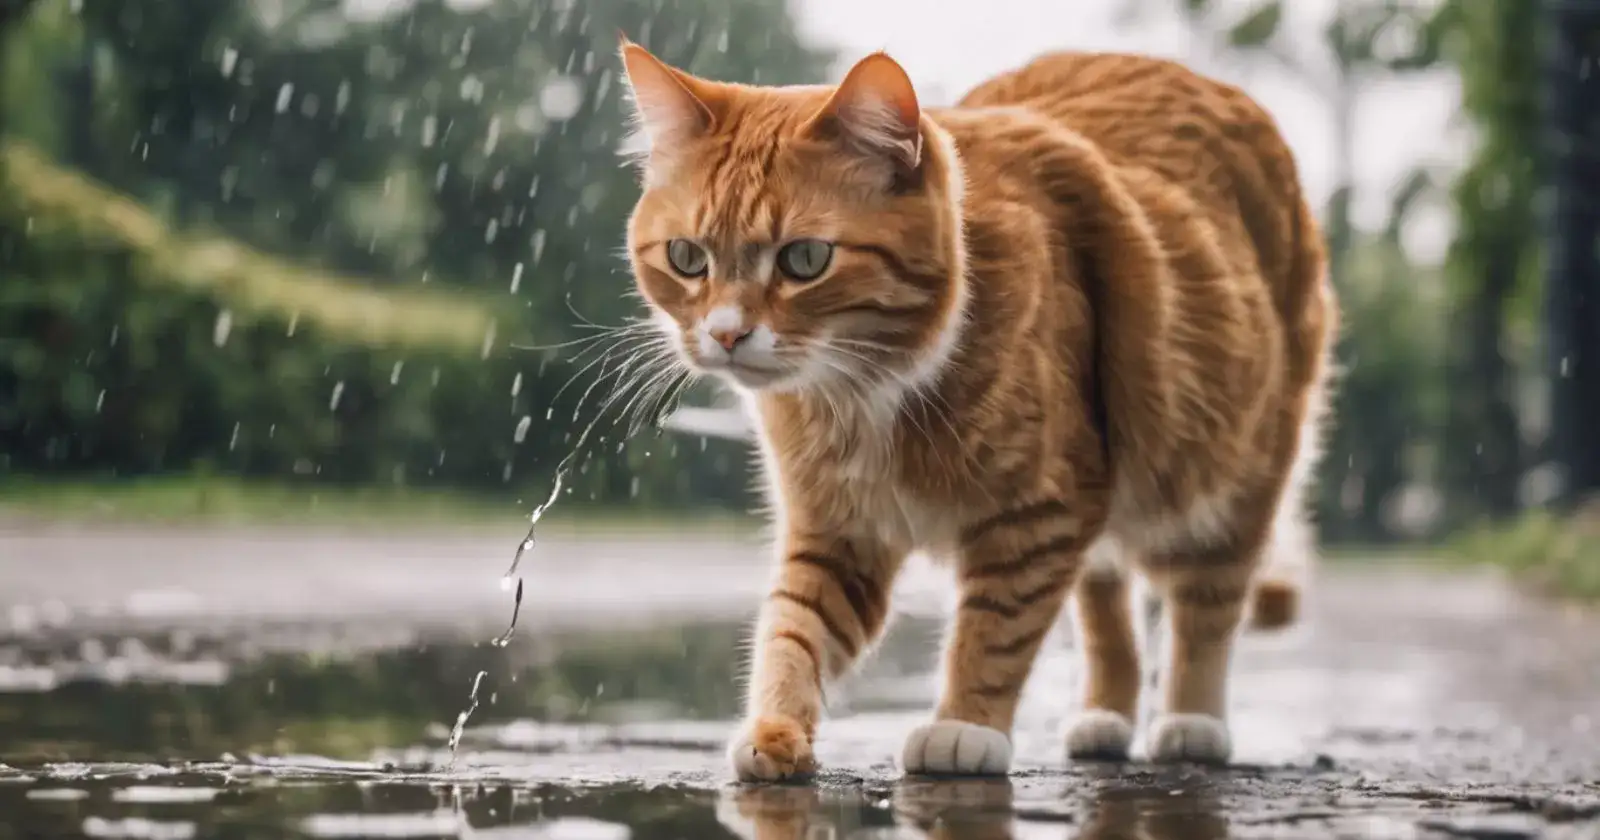 cats can drink rain water